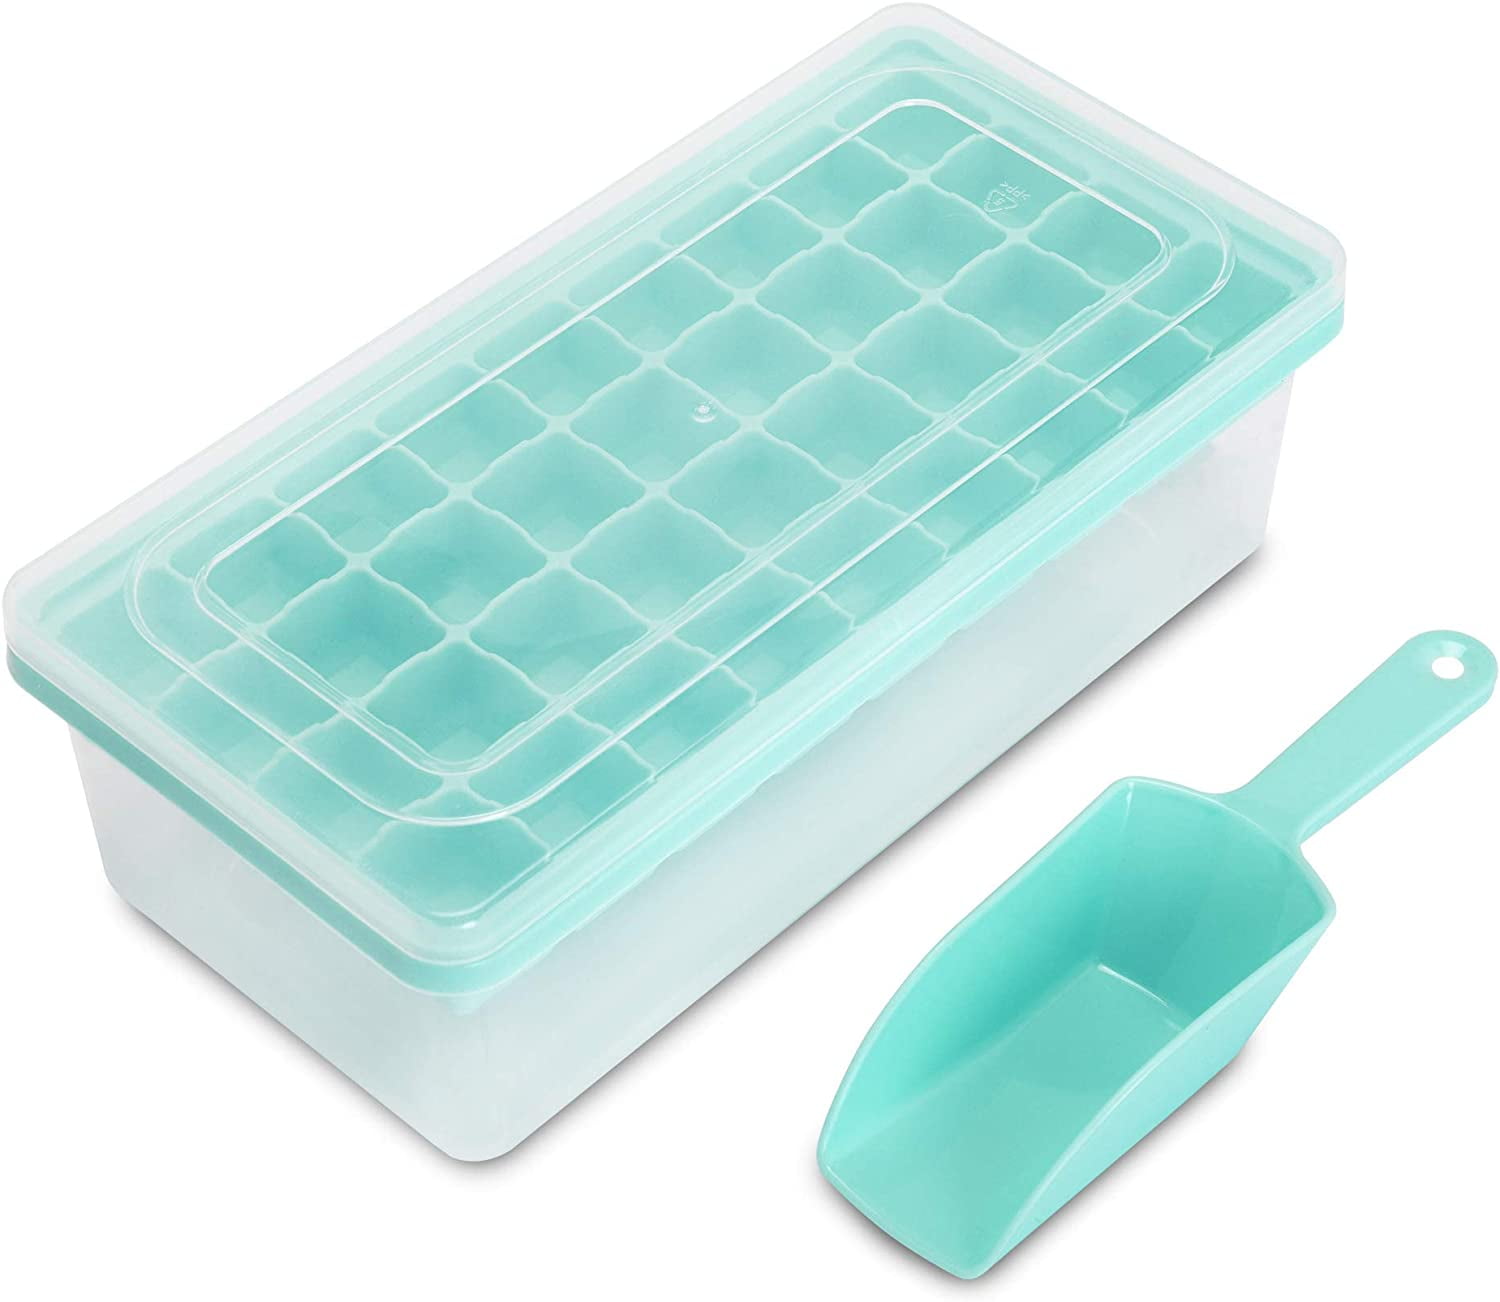 Soft Silicon Ice Cube Tray Ice Cream Compartment Container High Quality BPA Free 